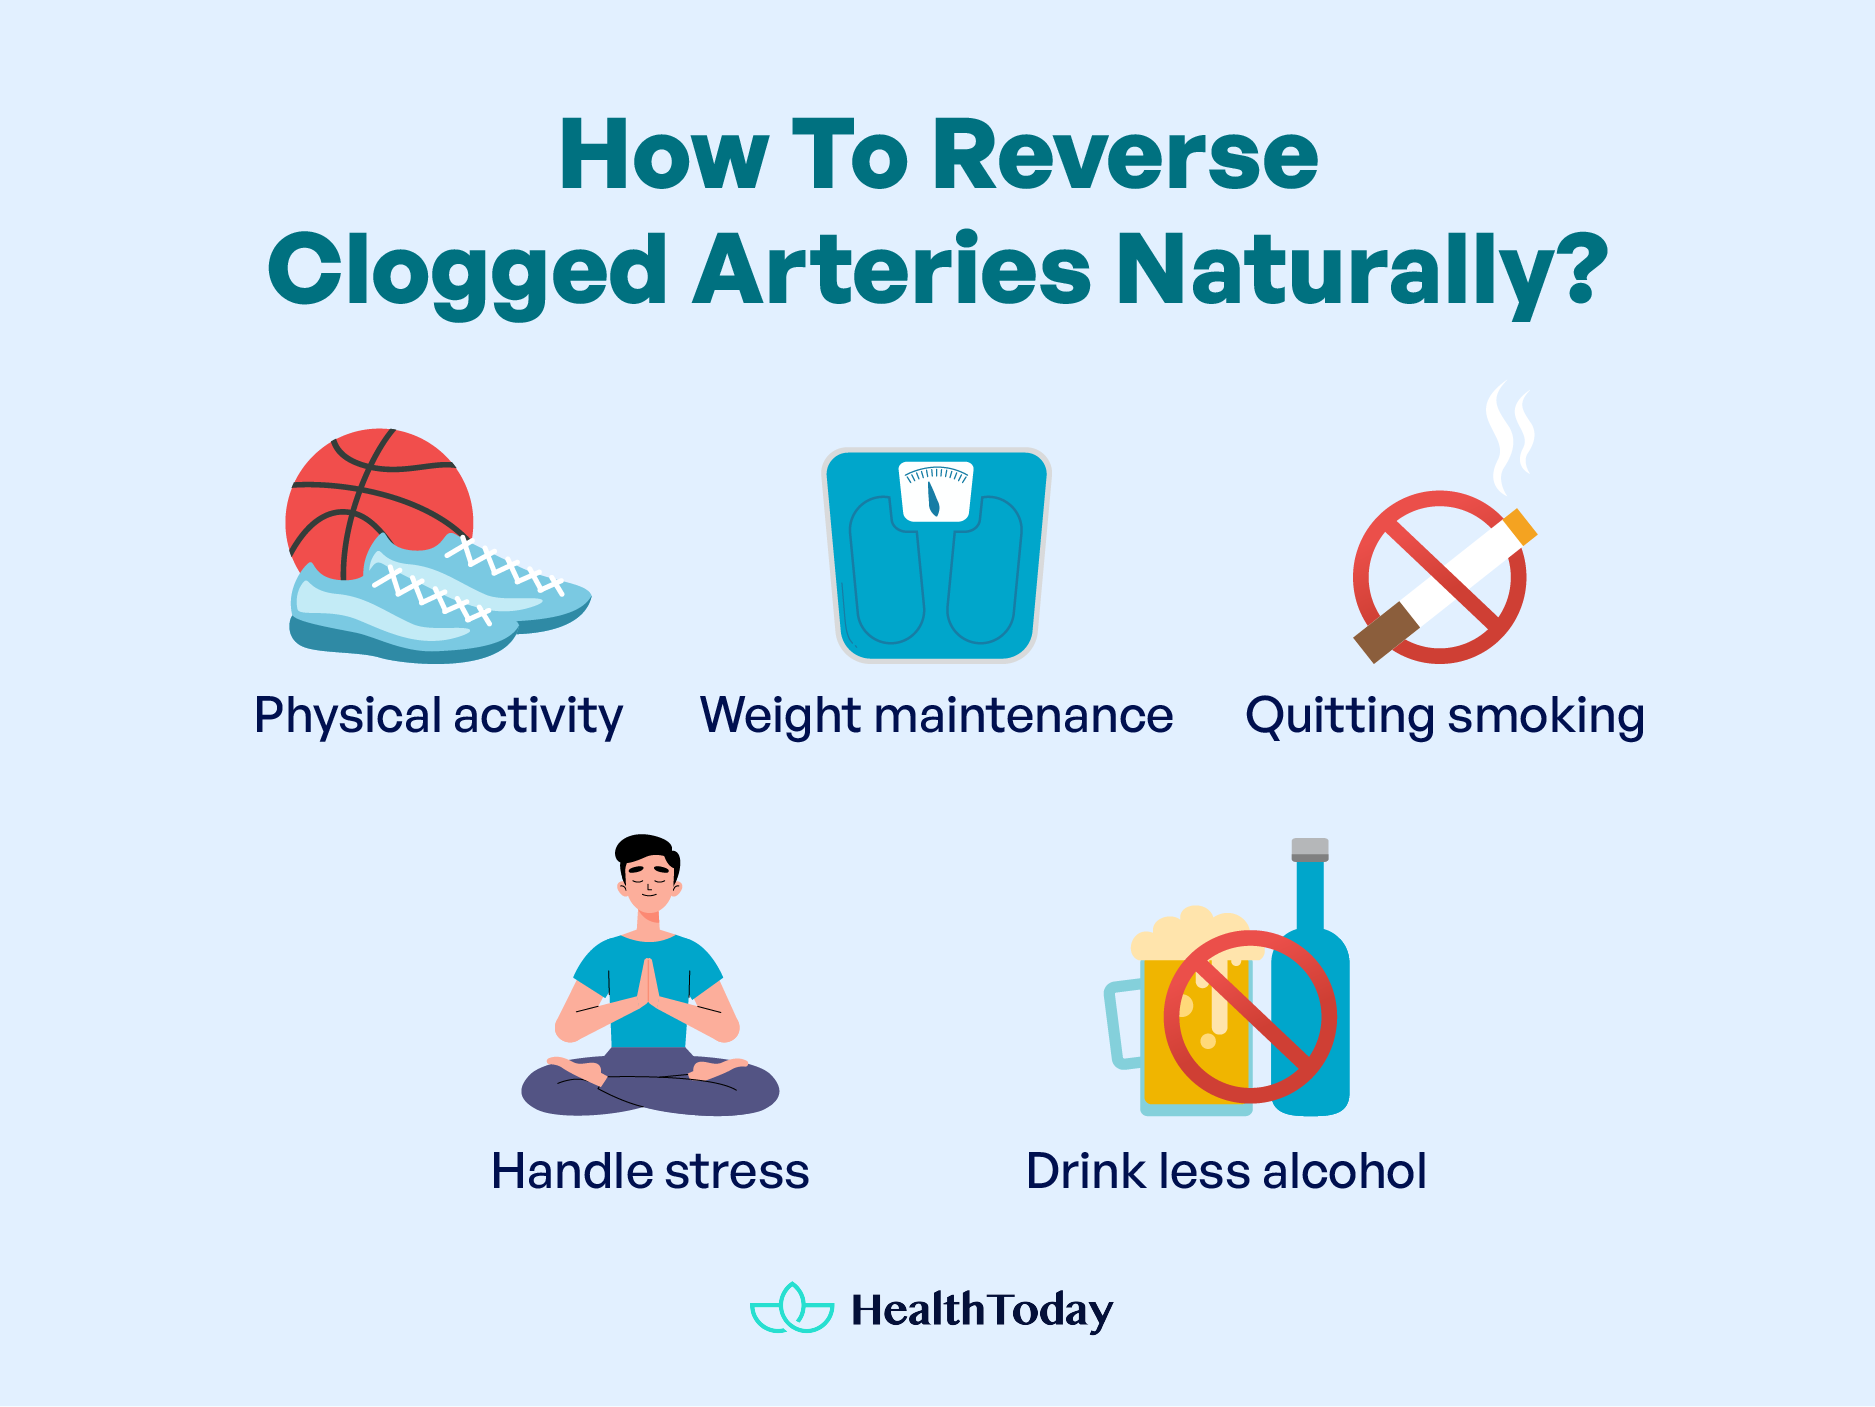 How to Reduce Plaque in Arteries Vascular Cleansing Naturally 03